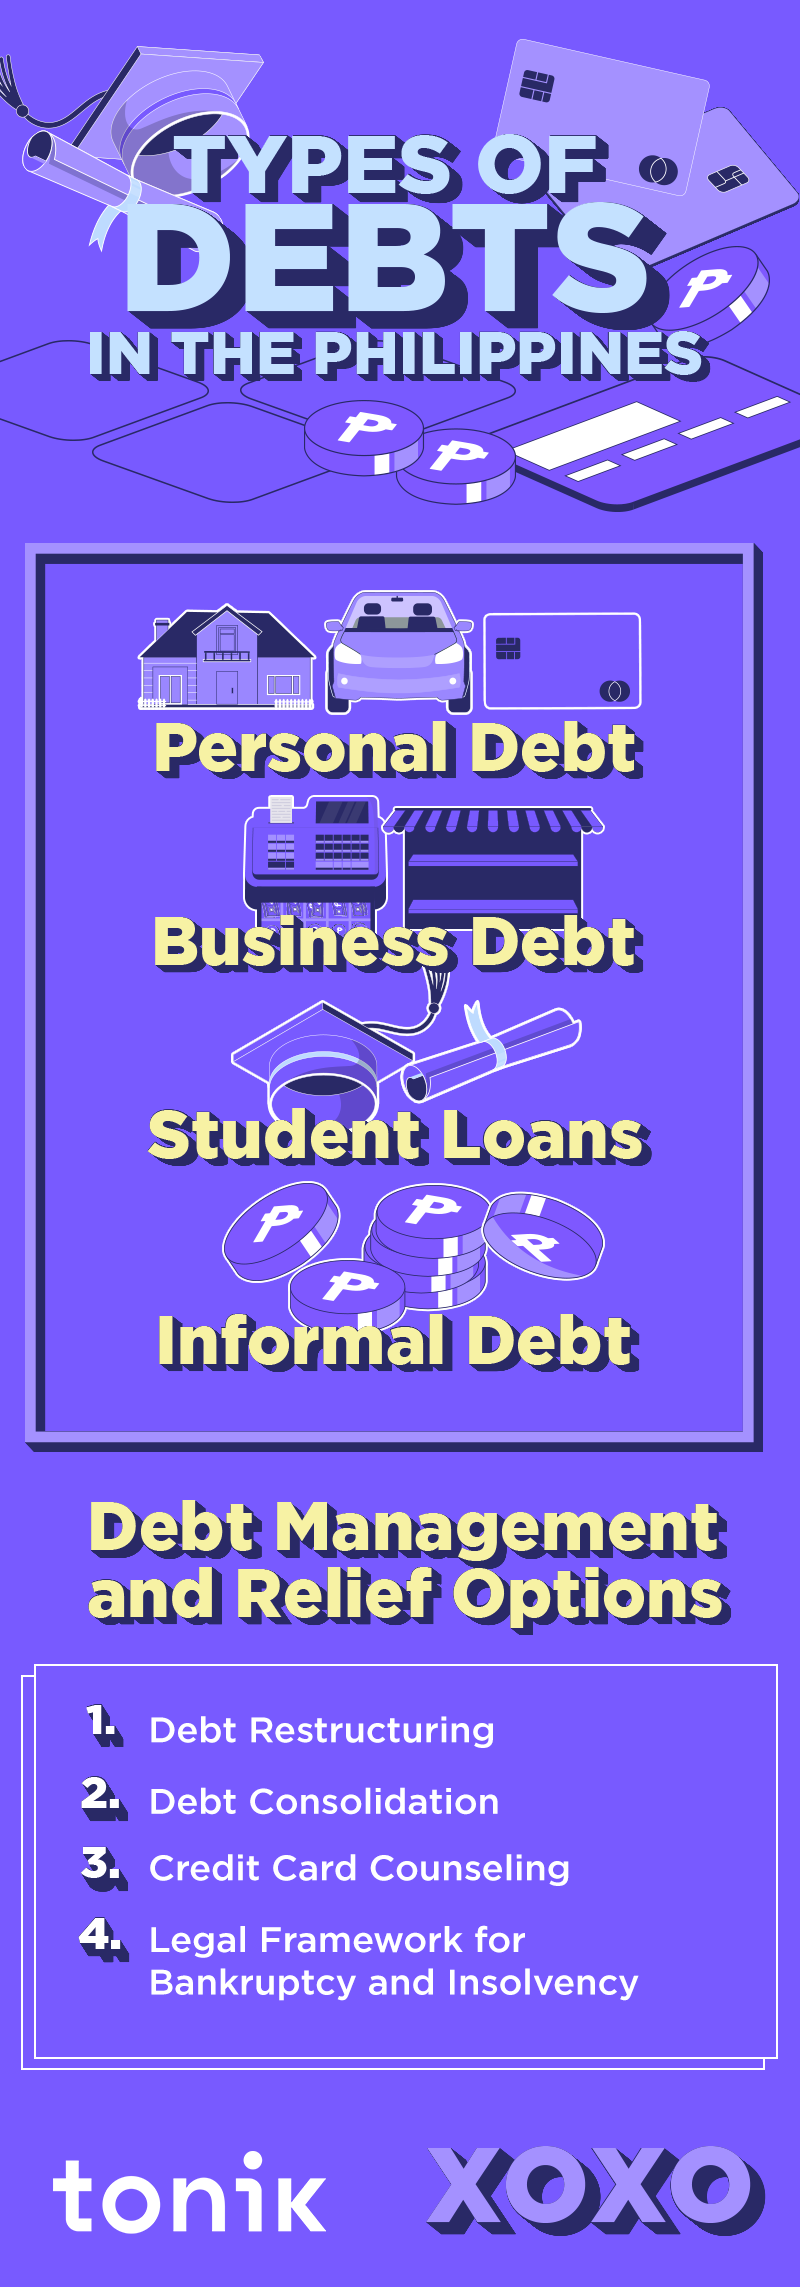  Dealing with Debt: Knowing the Types of Debts in the Philippines